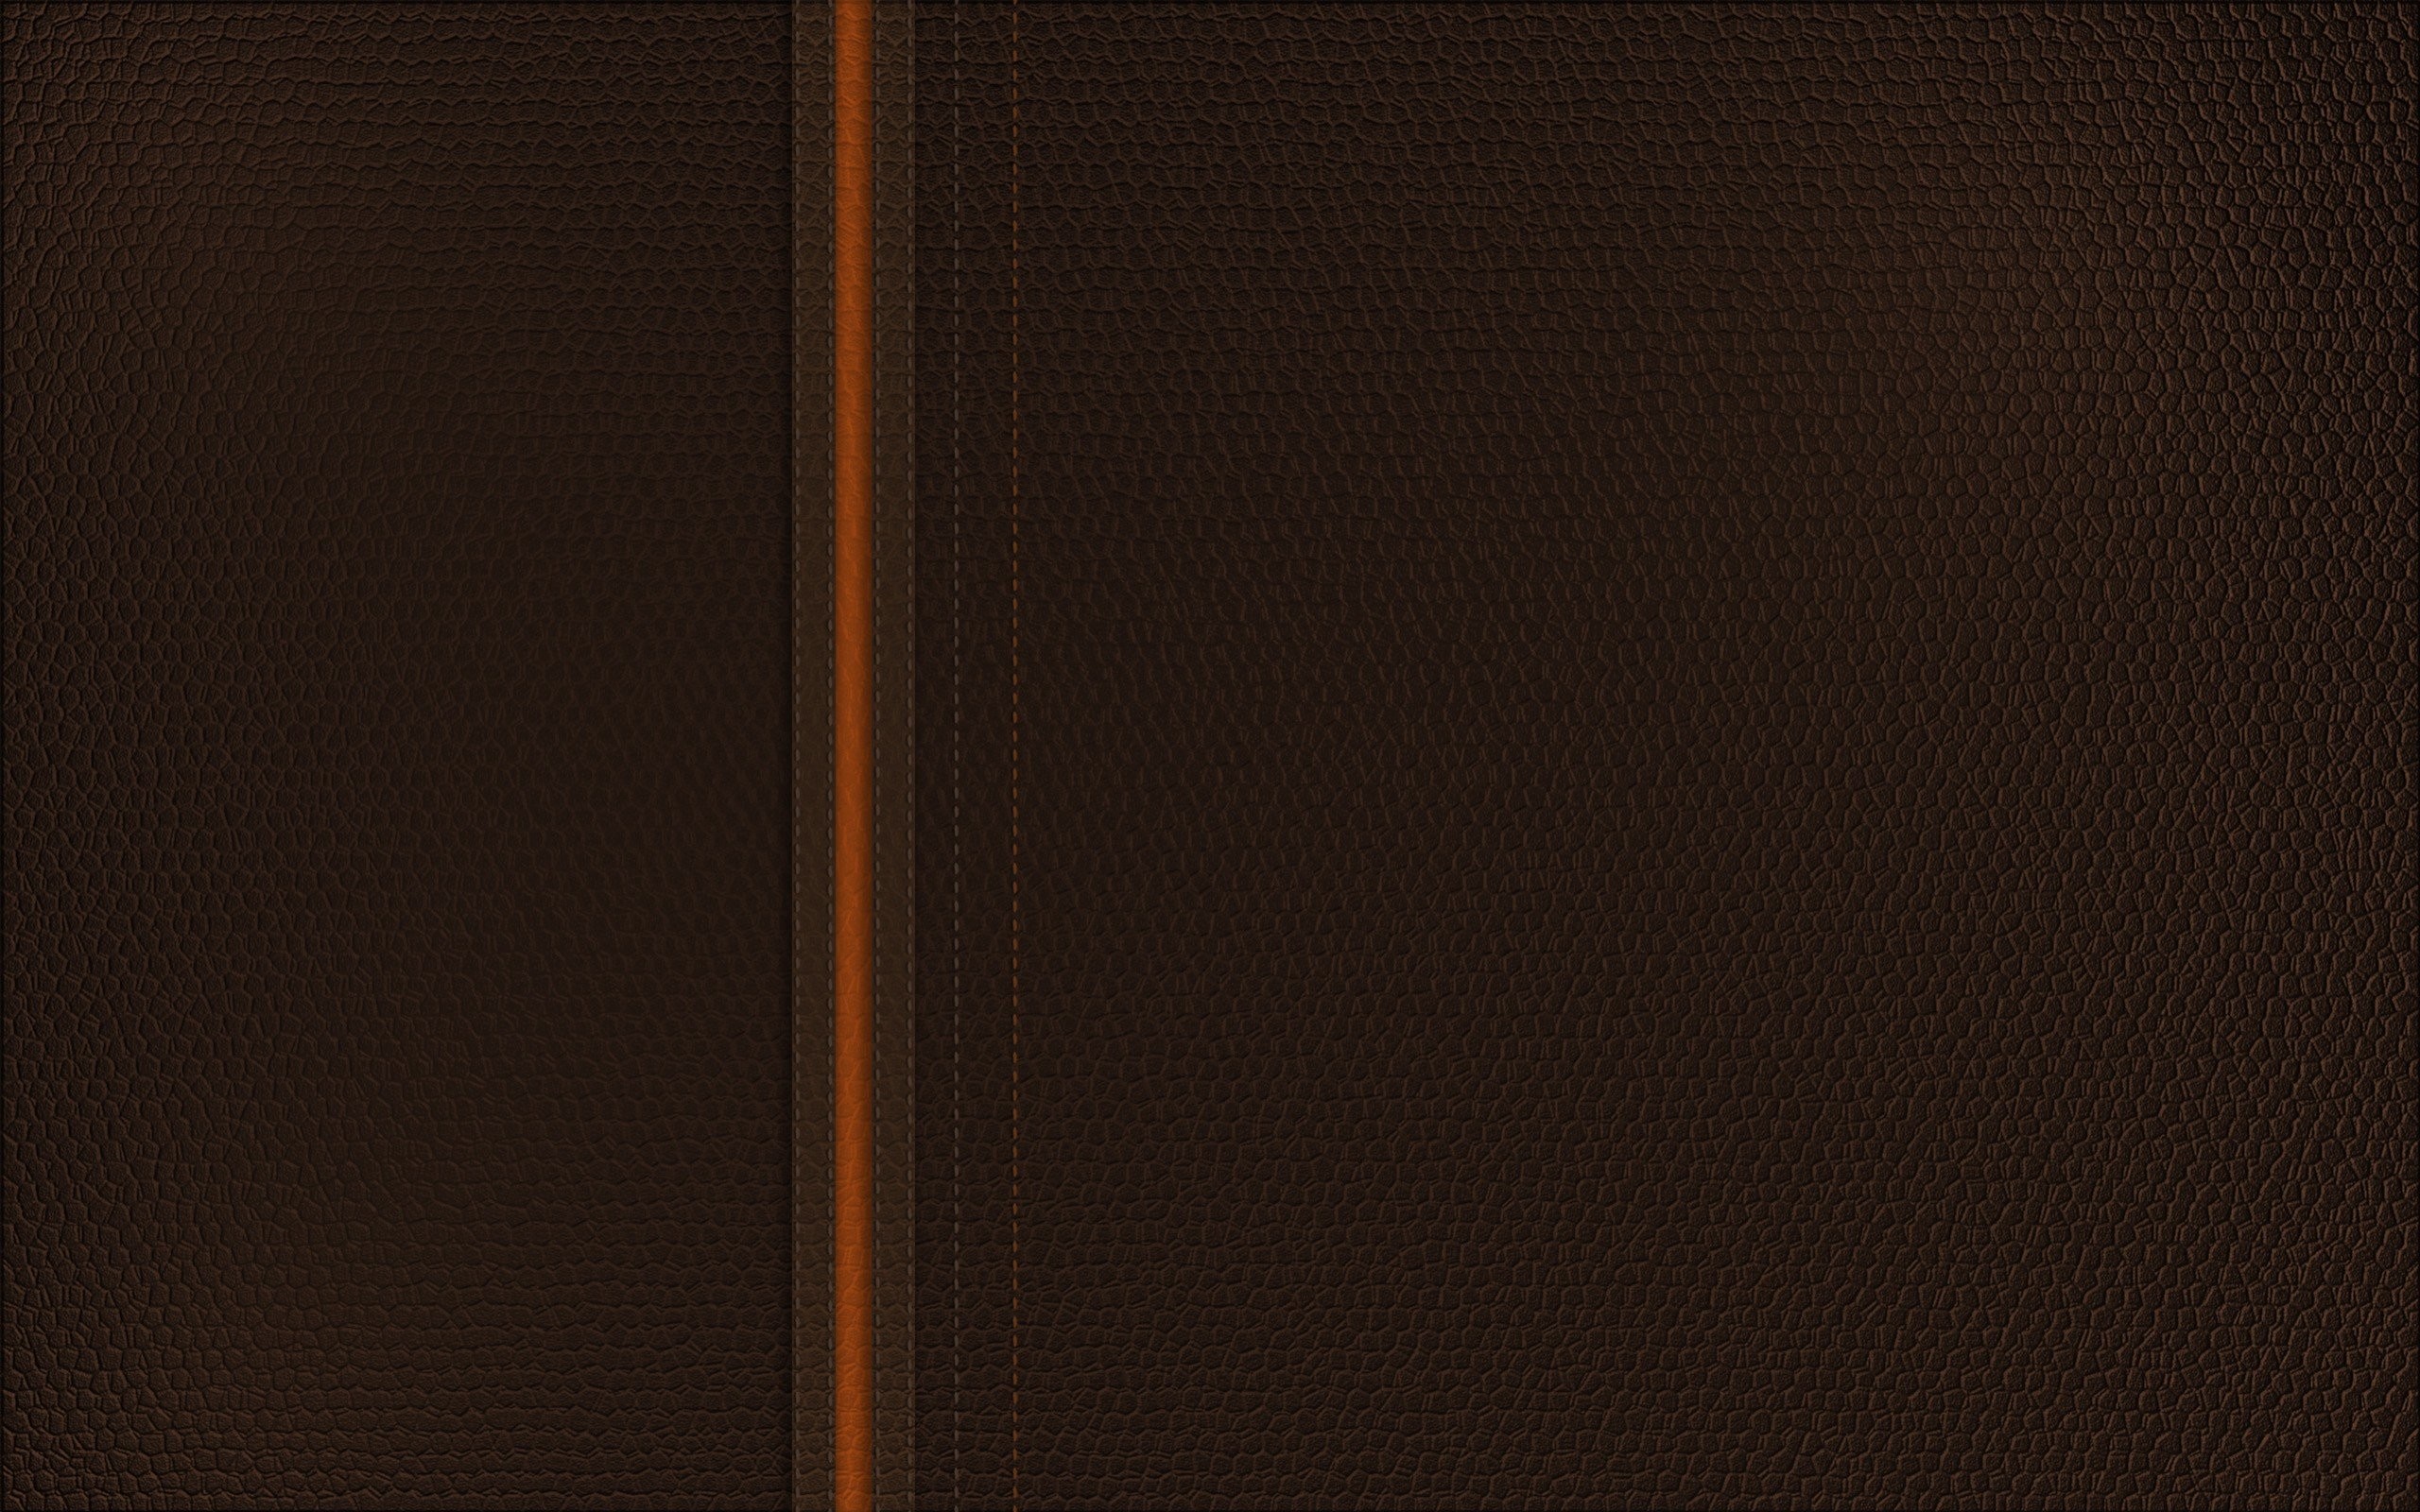 2560x1600 Leather brown wallpaper |  | 234884 | WallpaperUP